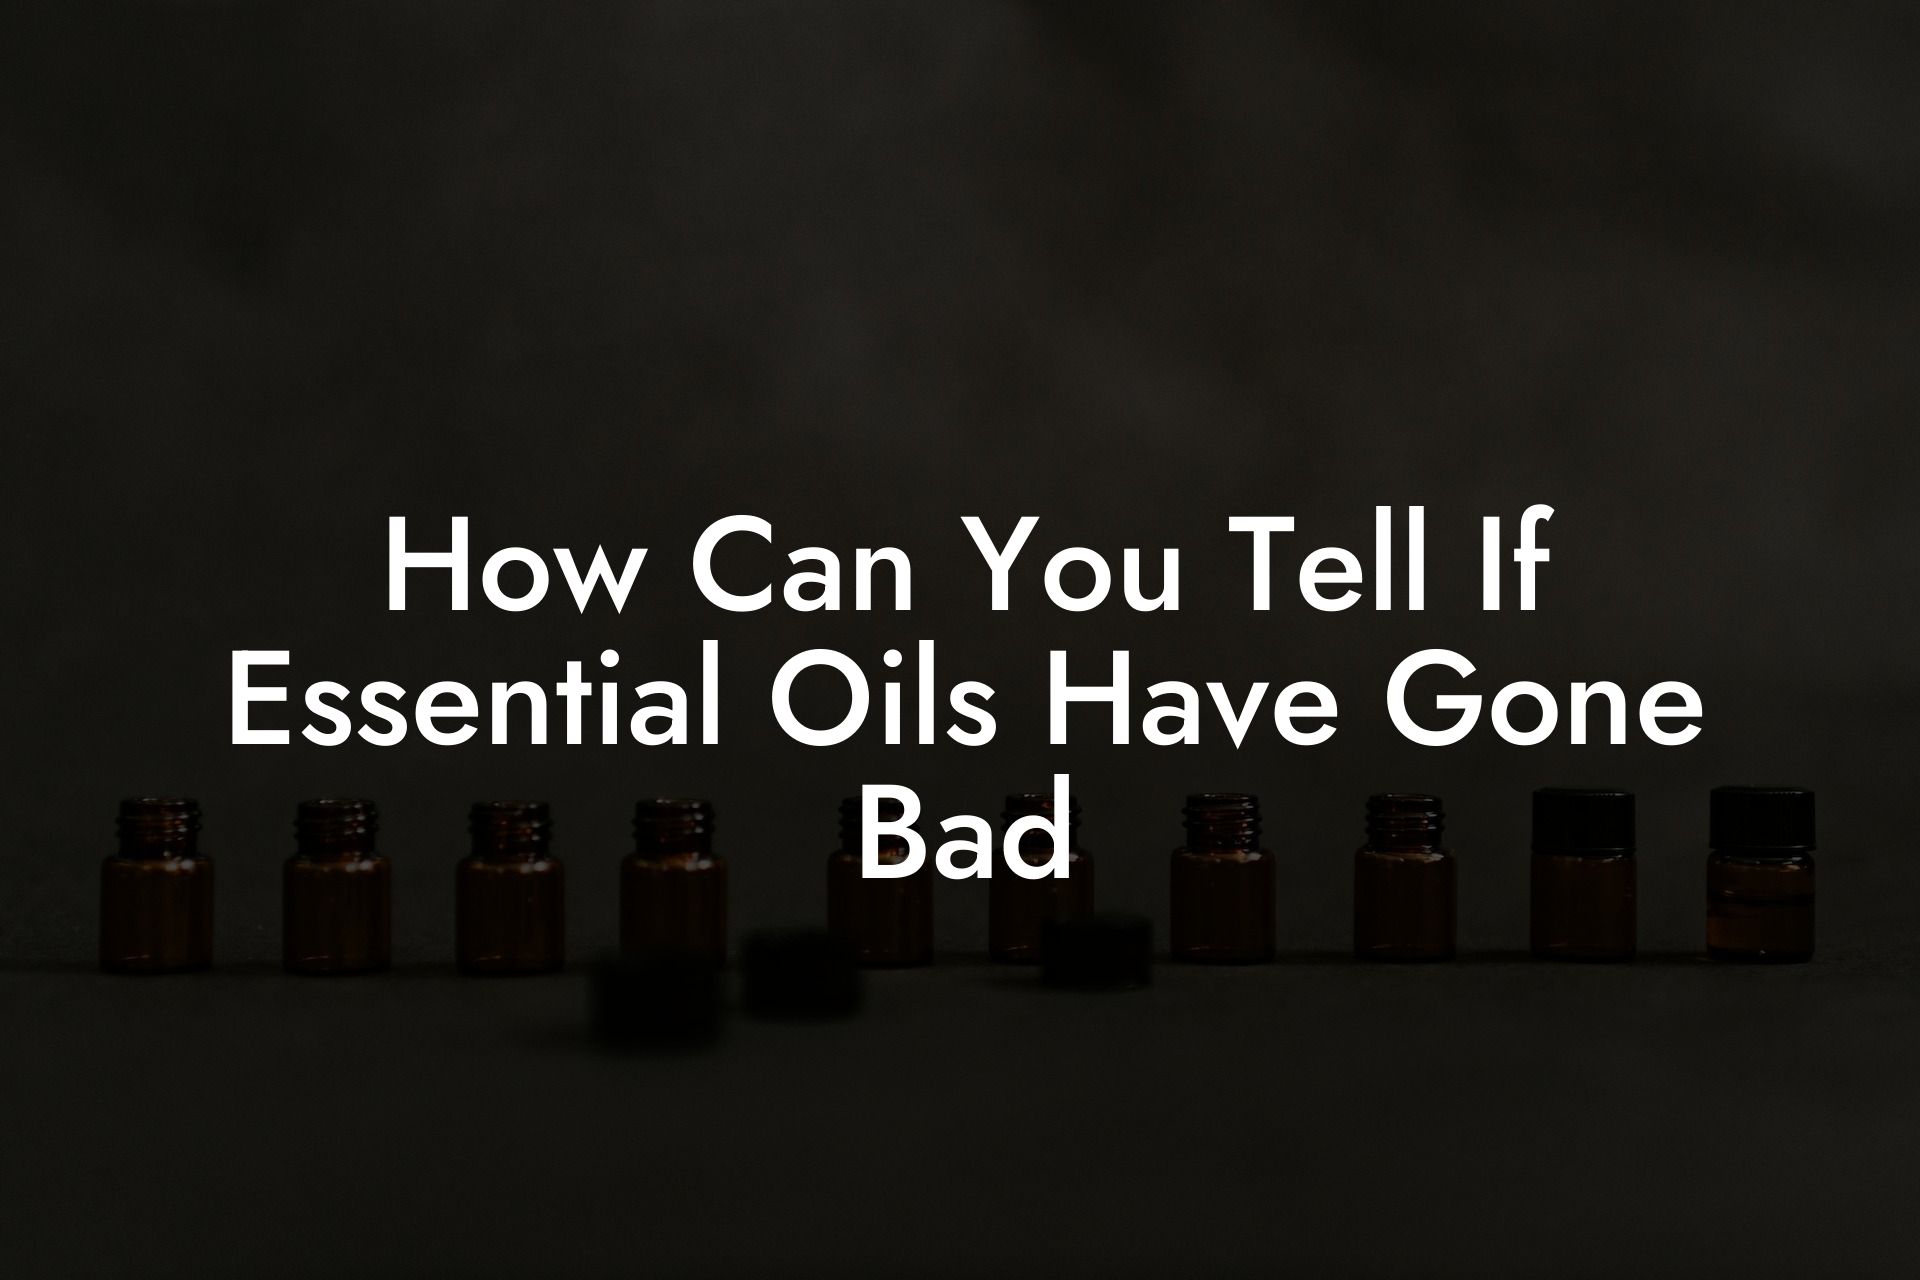 How Can You Tell If Essential Oils Have Gone Bad